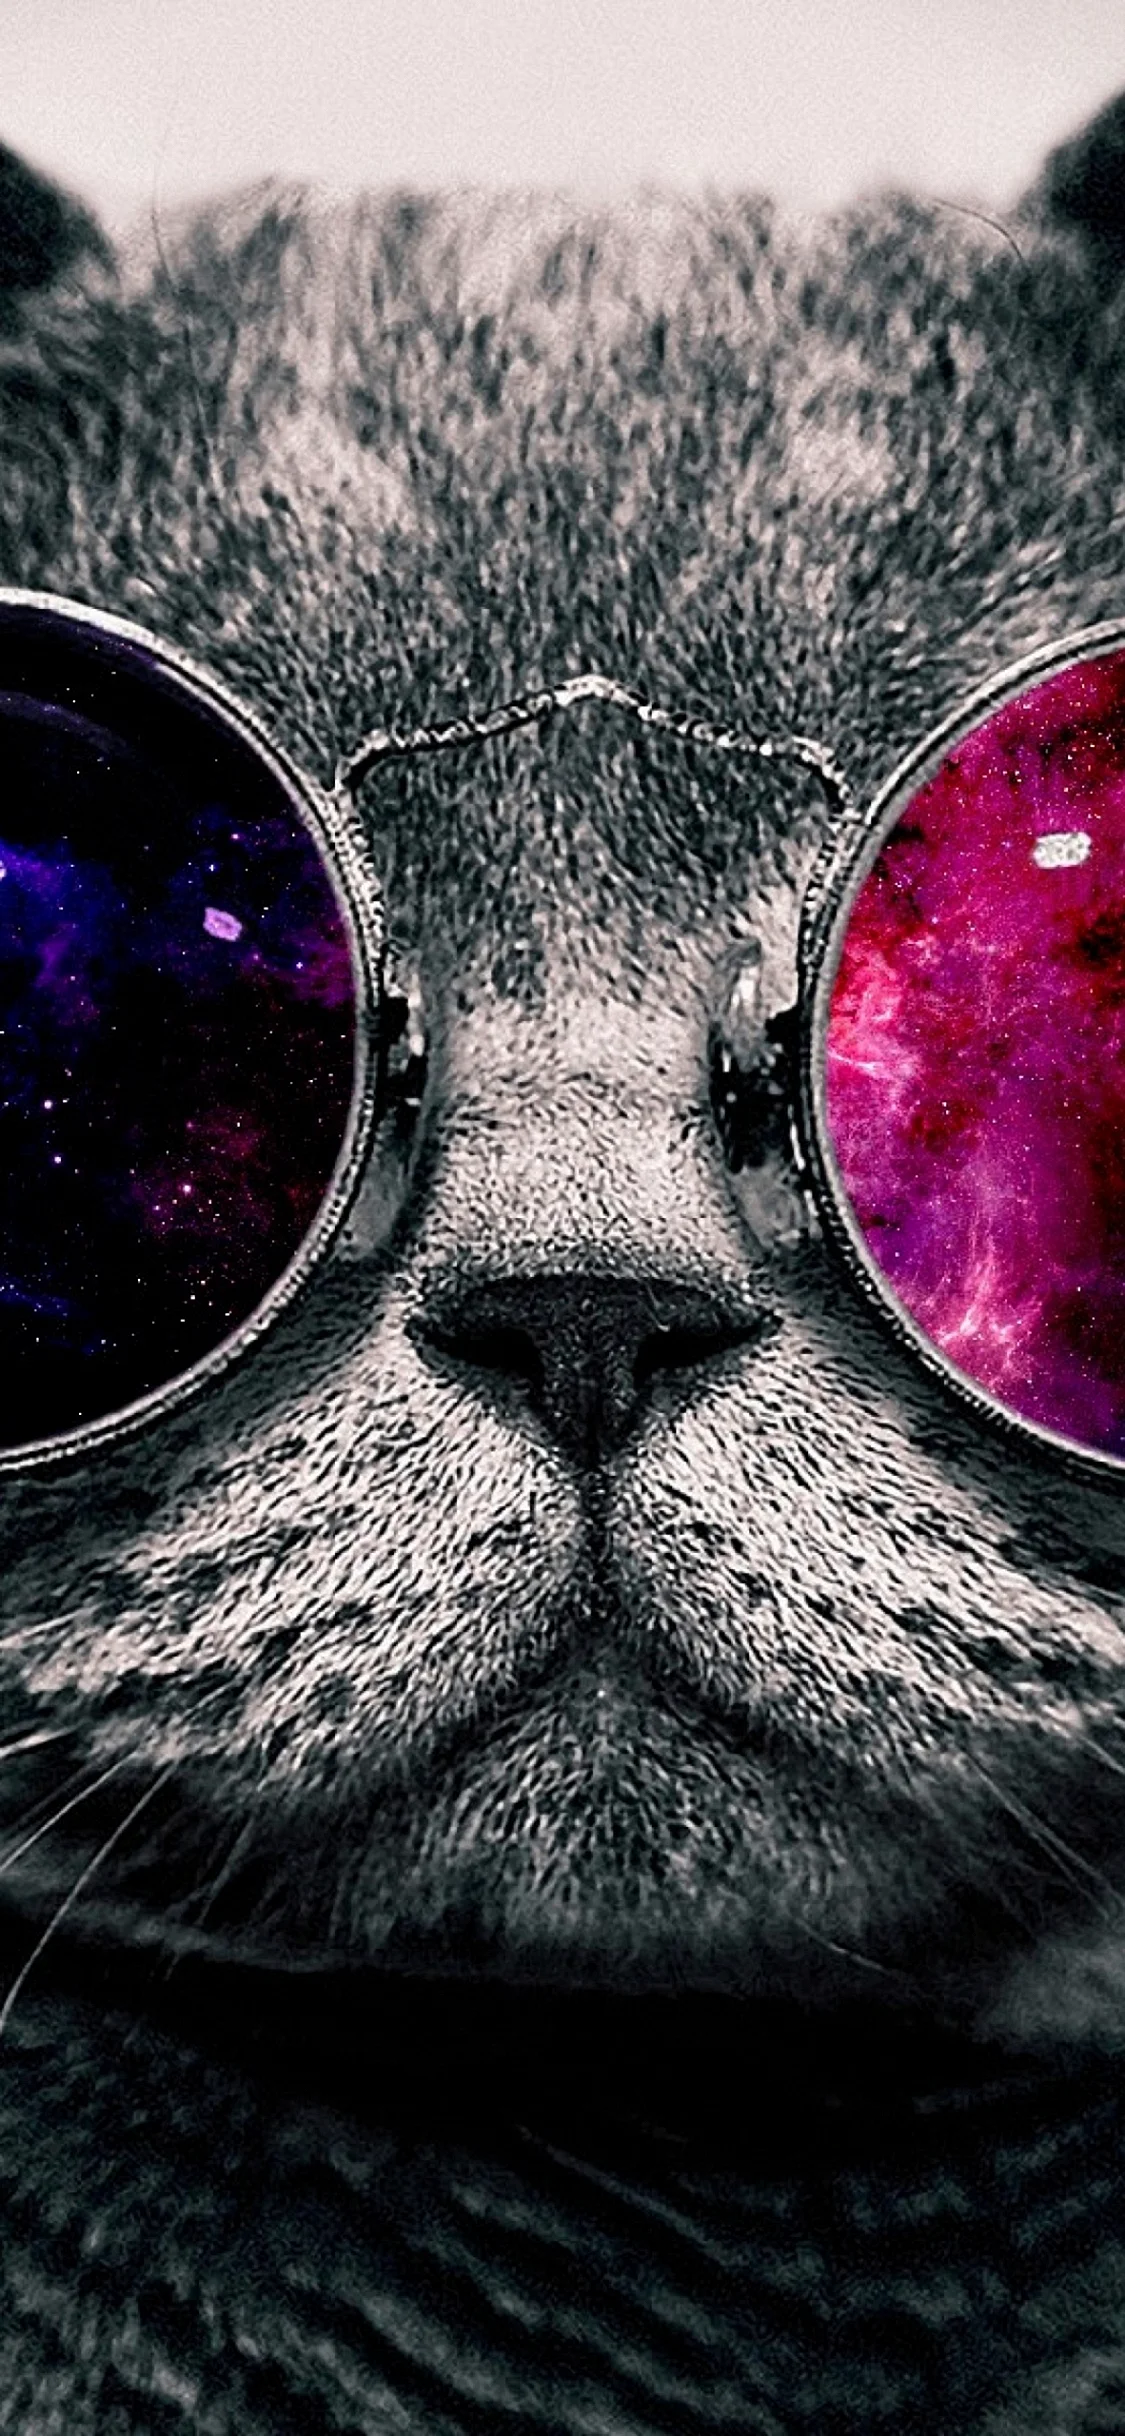 Trippy Cat Wallpaper for iPhone 11 Pro